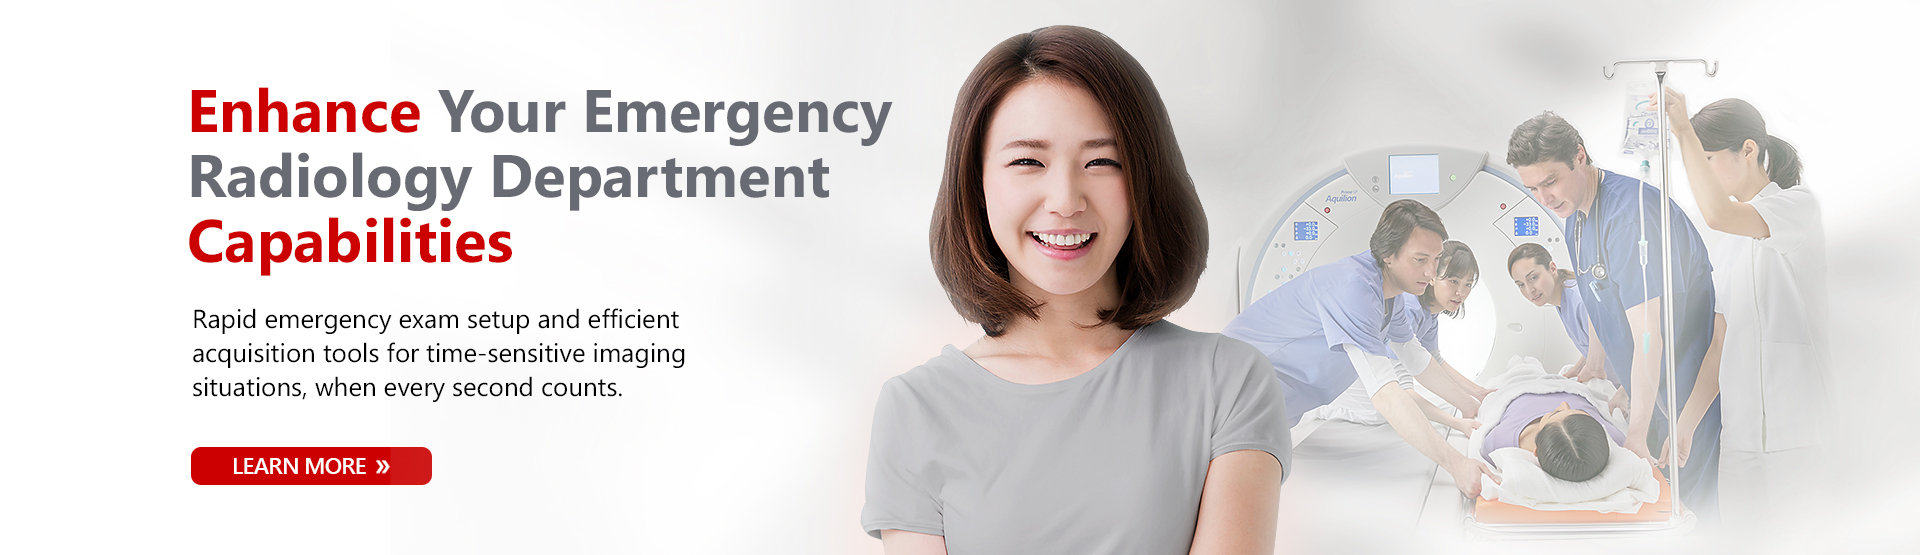 Enhance Your Emergency Radiology Department Capabilities | Rapid emergency exam setup and efficient acquisition tools for time-sensitive imaging situations, when every second counts. | Learn More